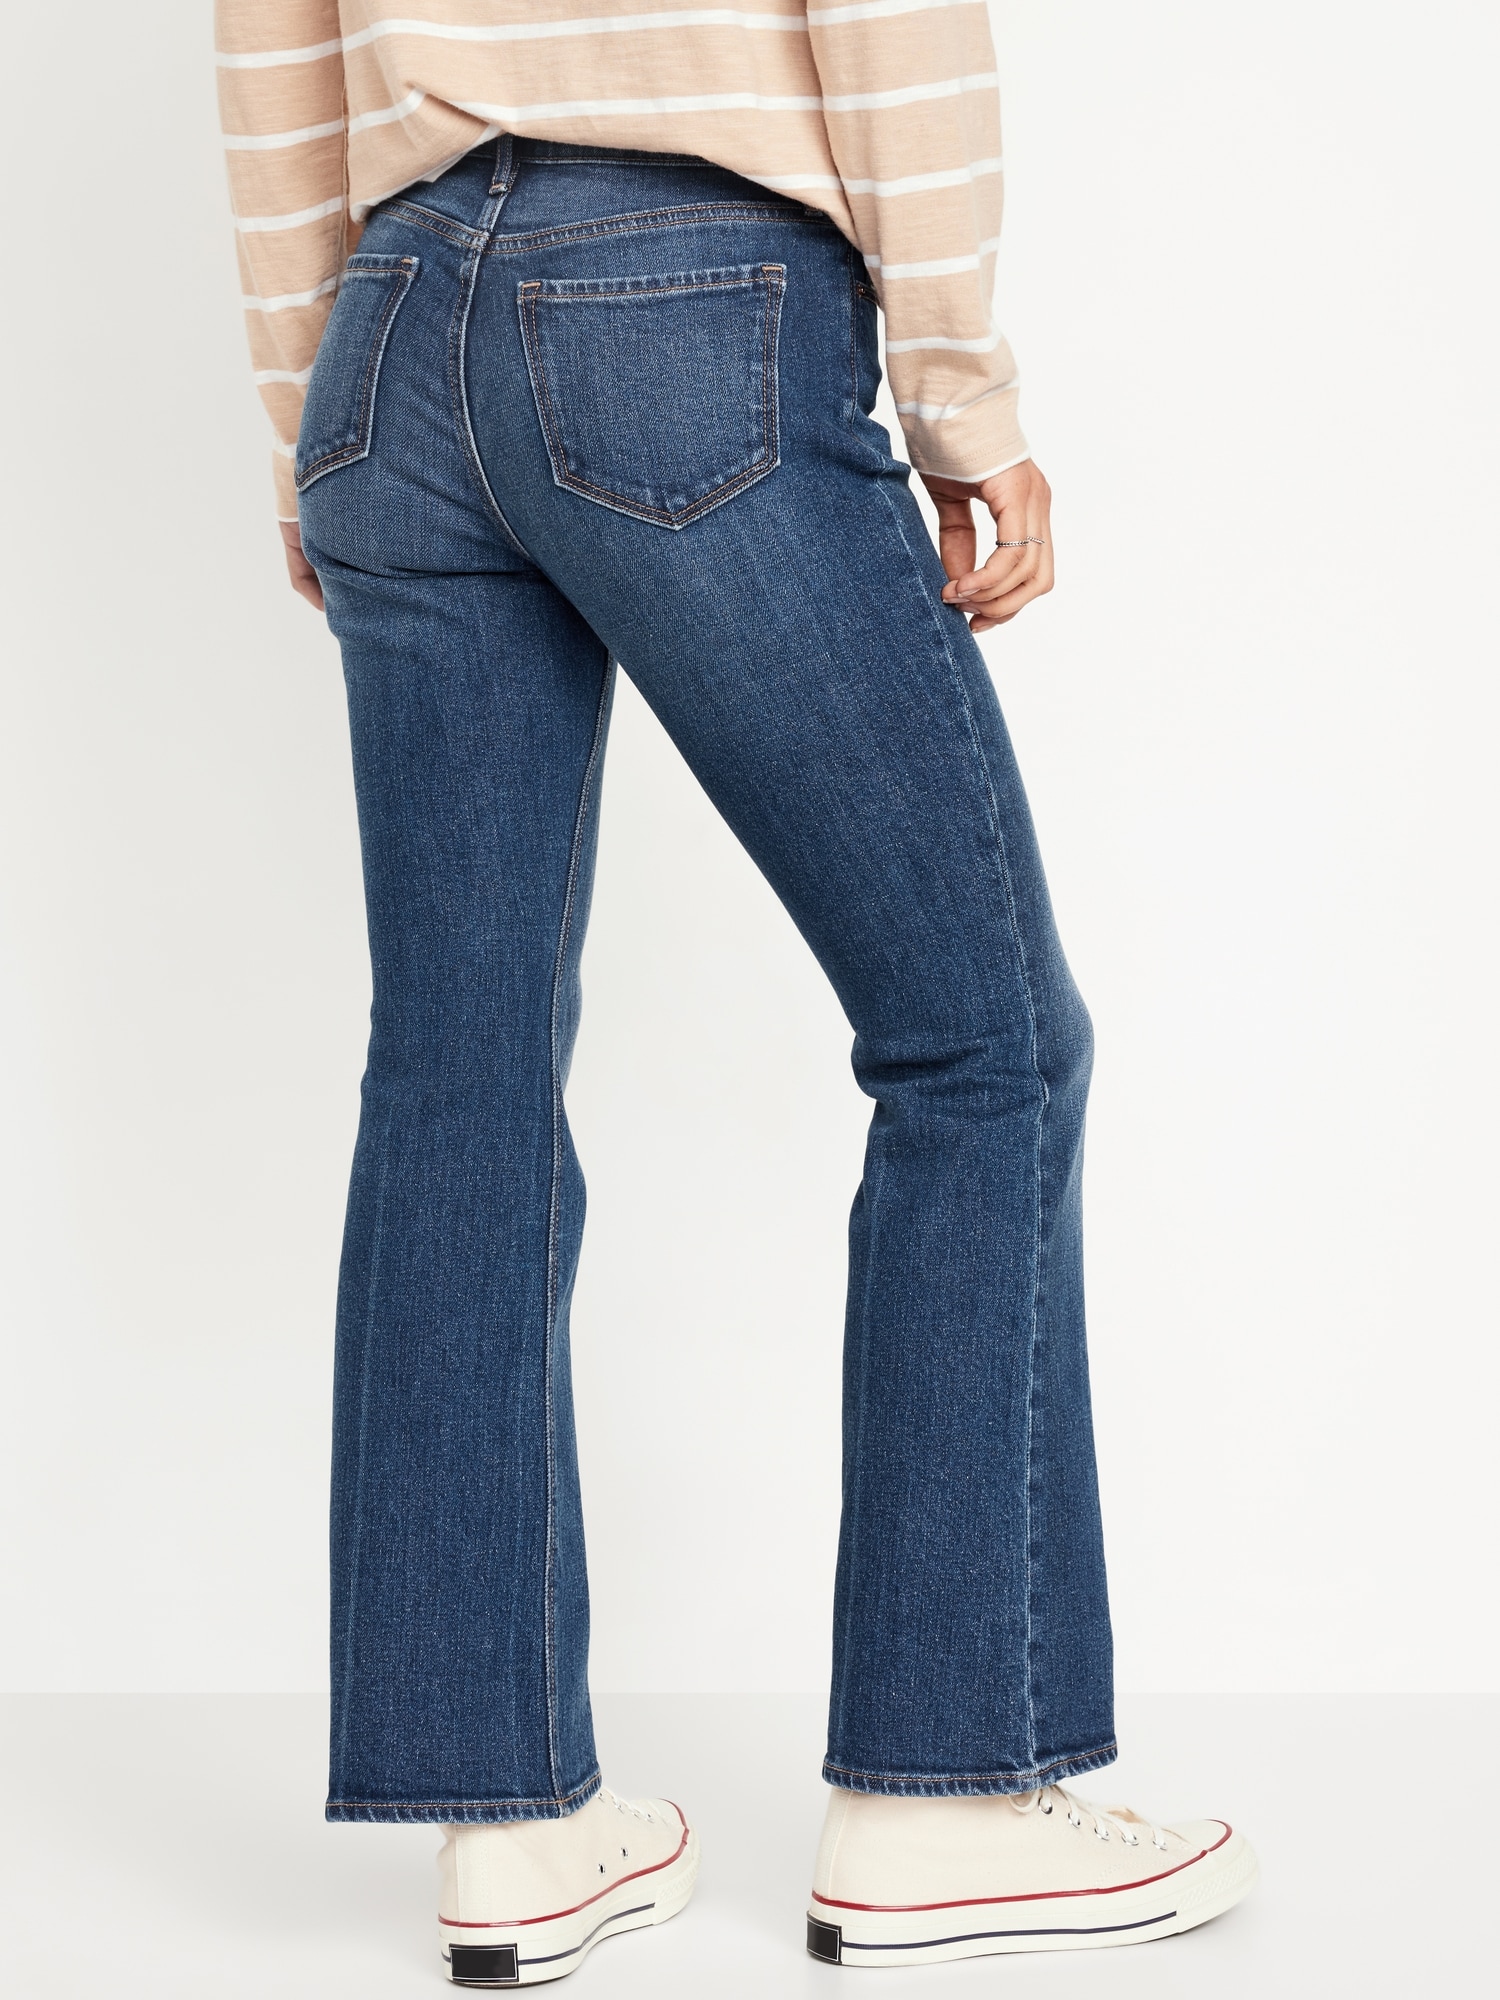 High waisted flare jeans